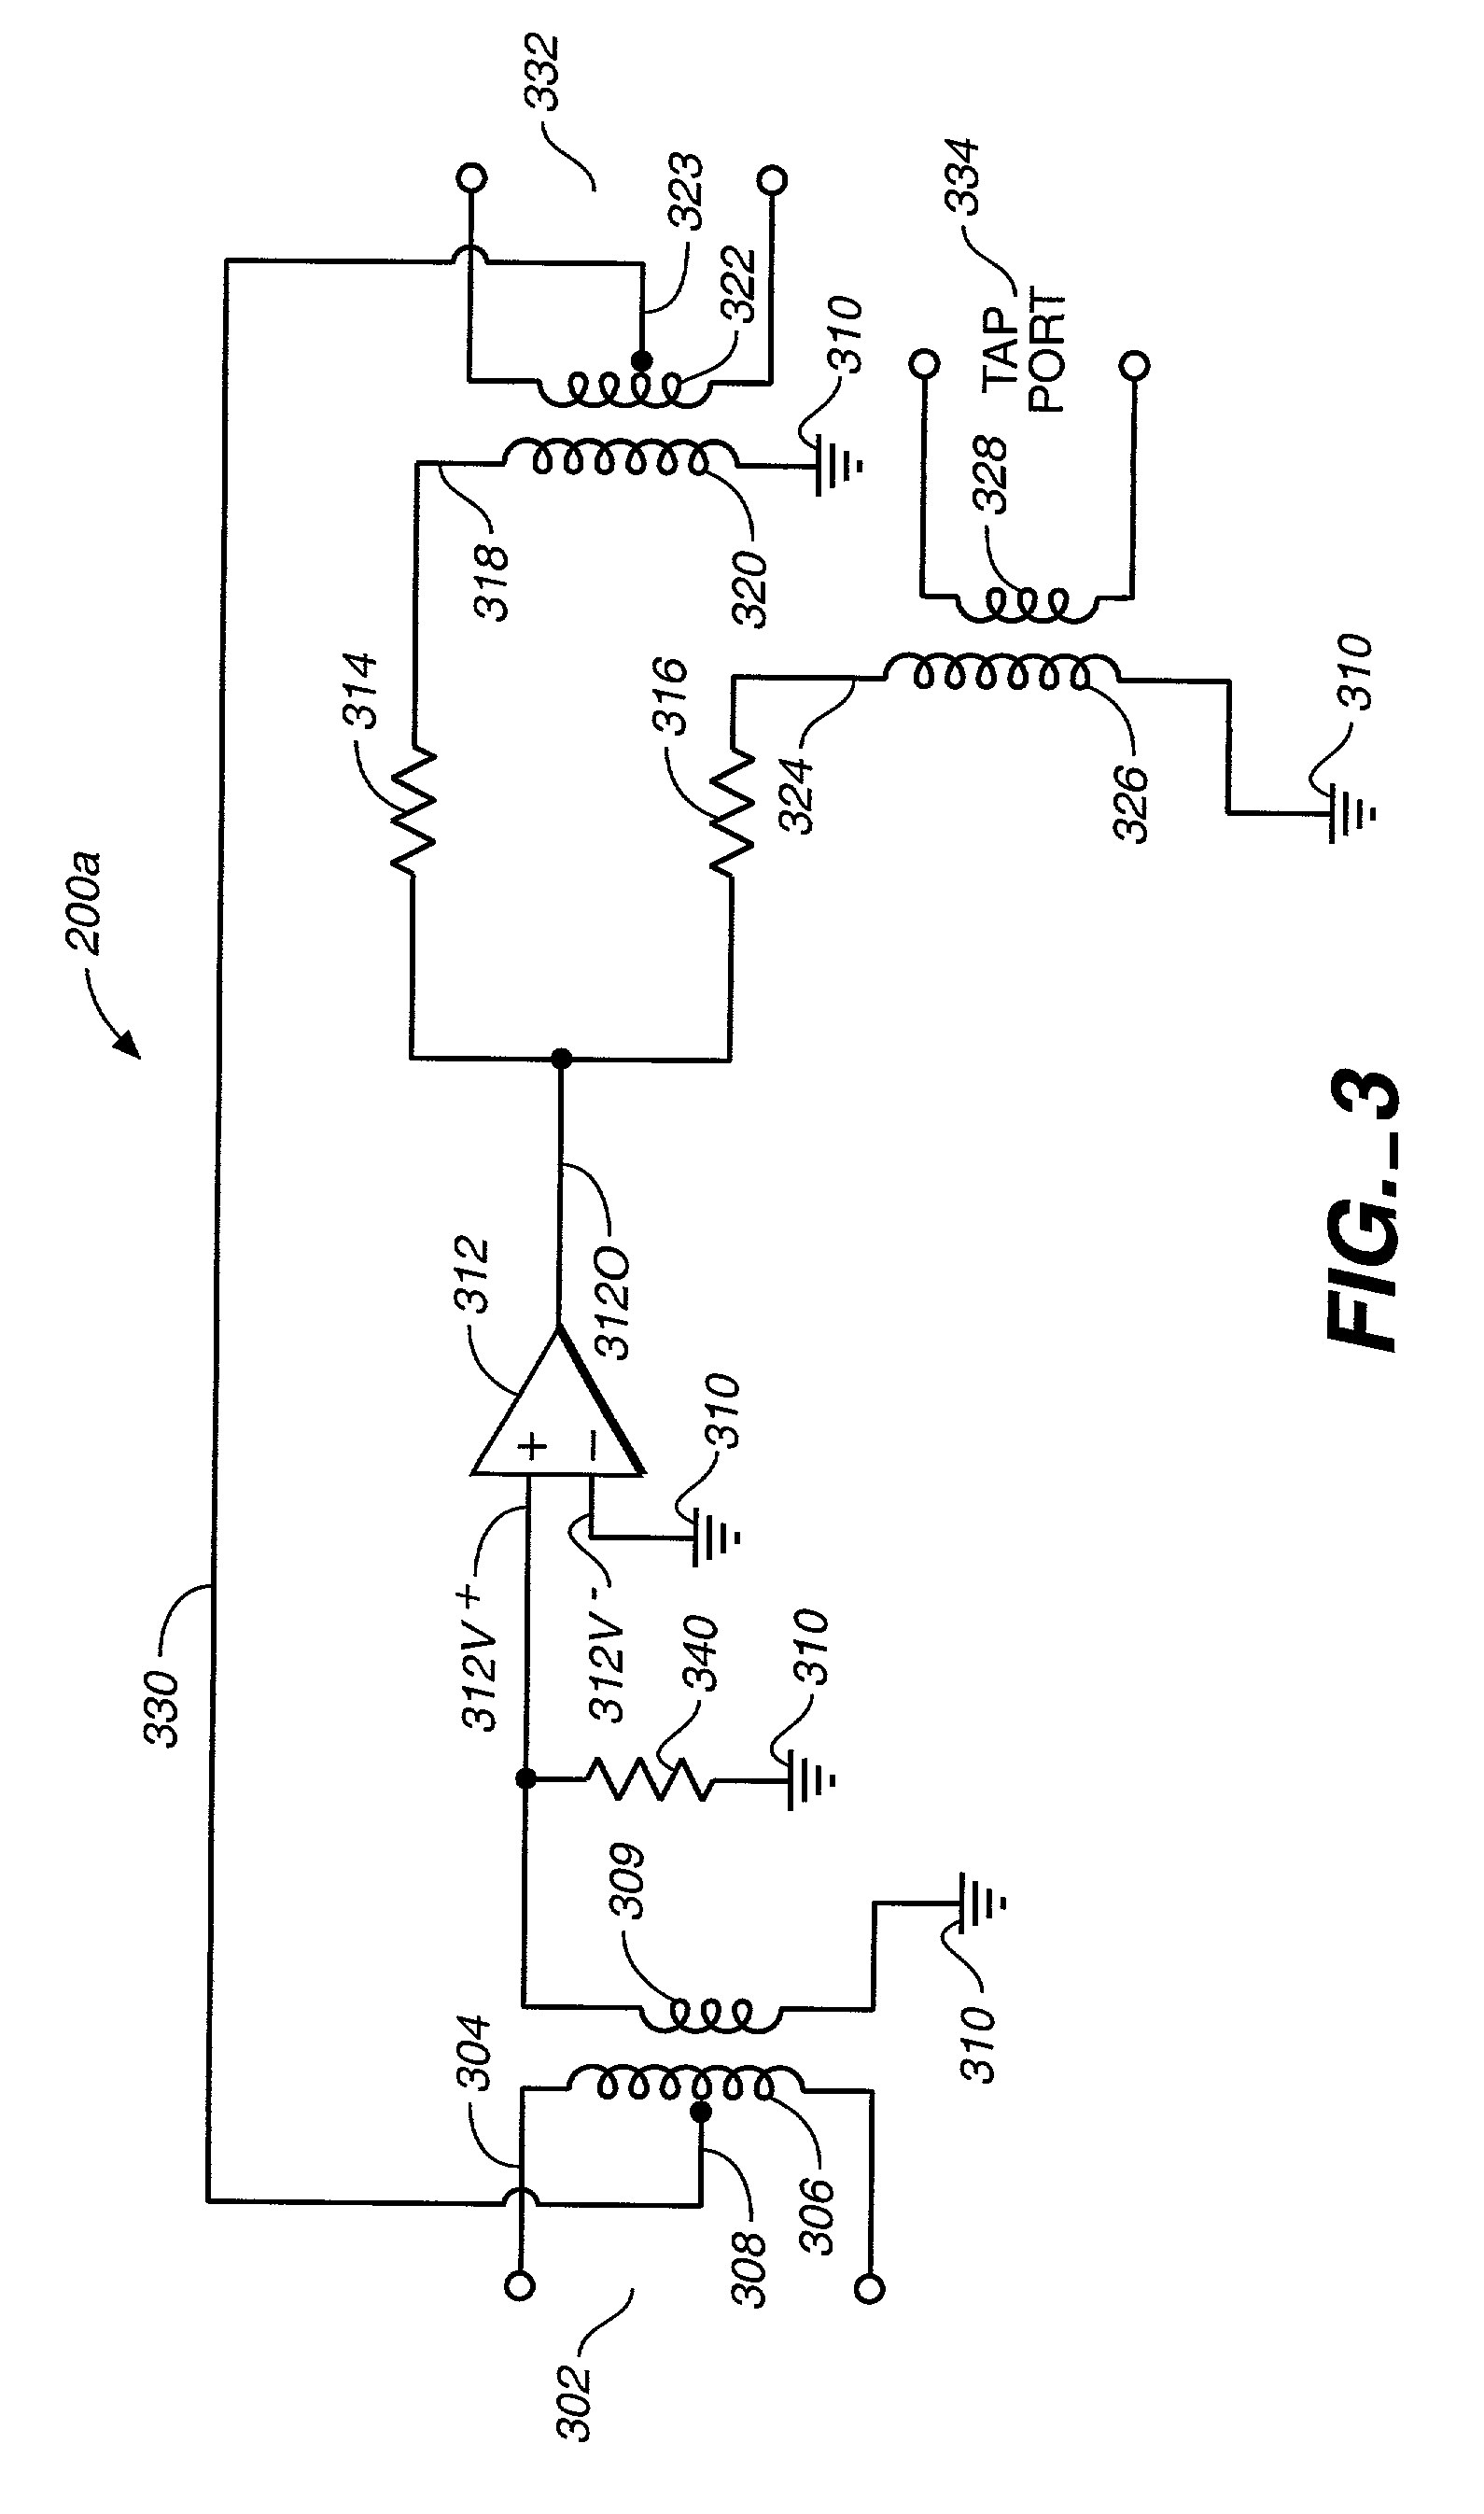 In-line power tap device for Ethernet data signal